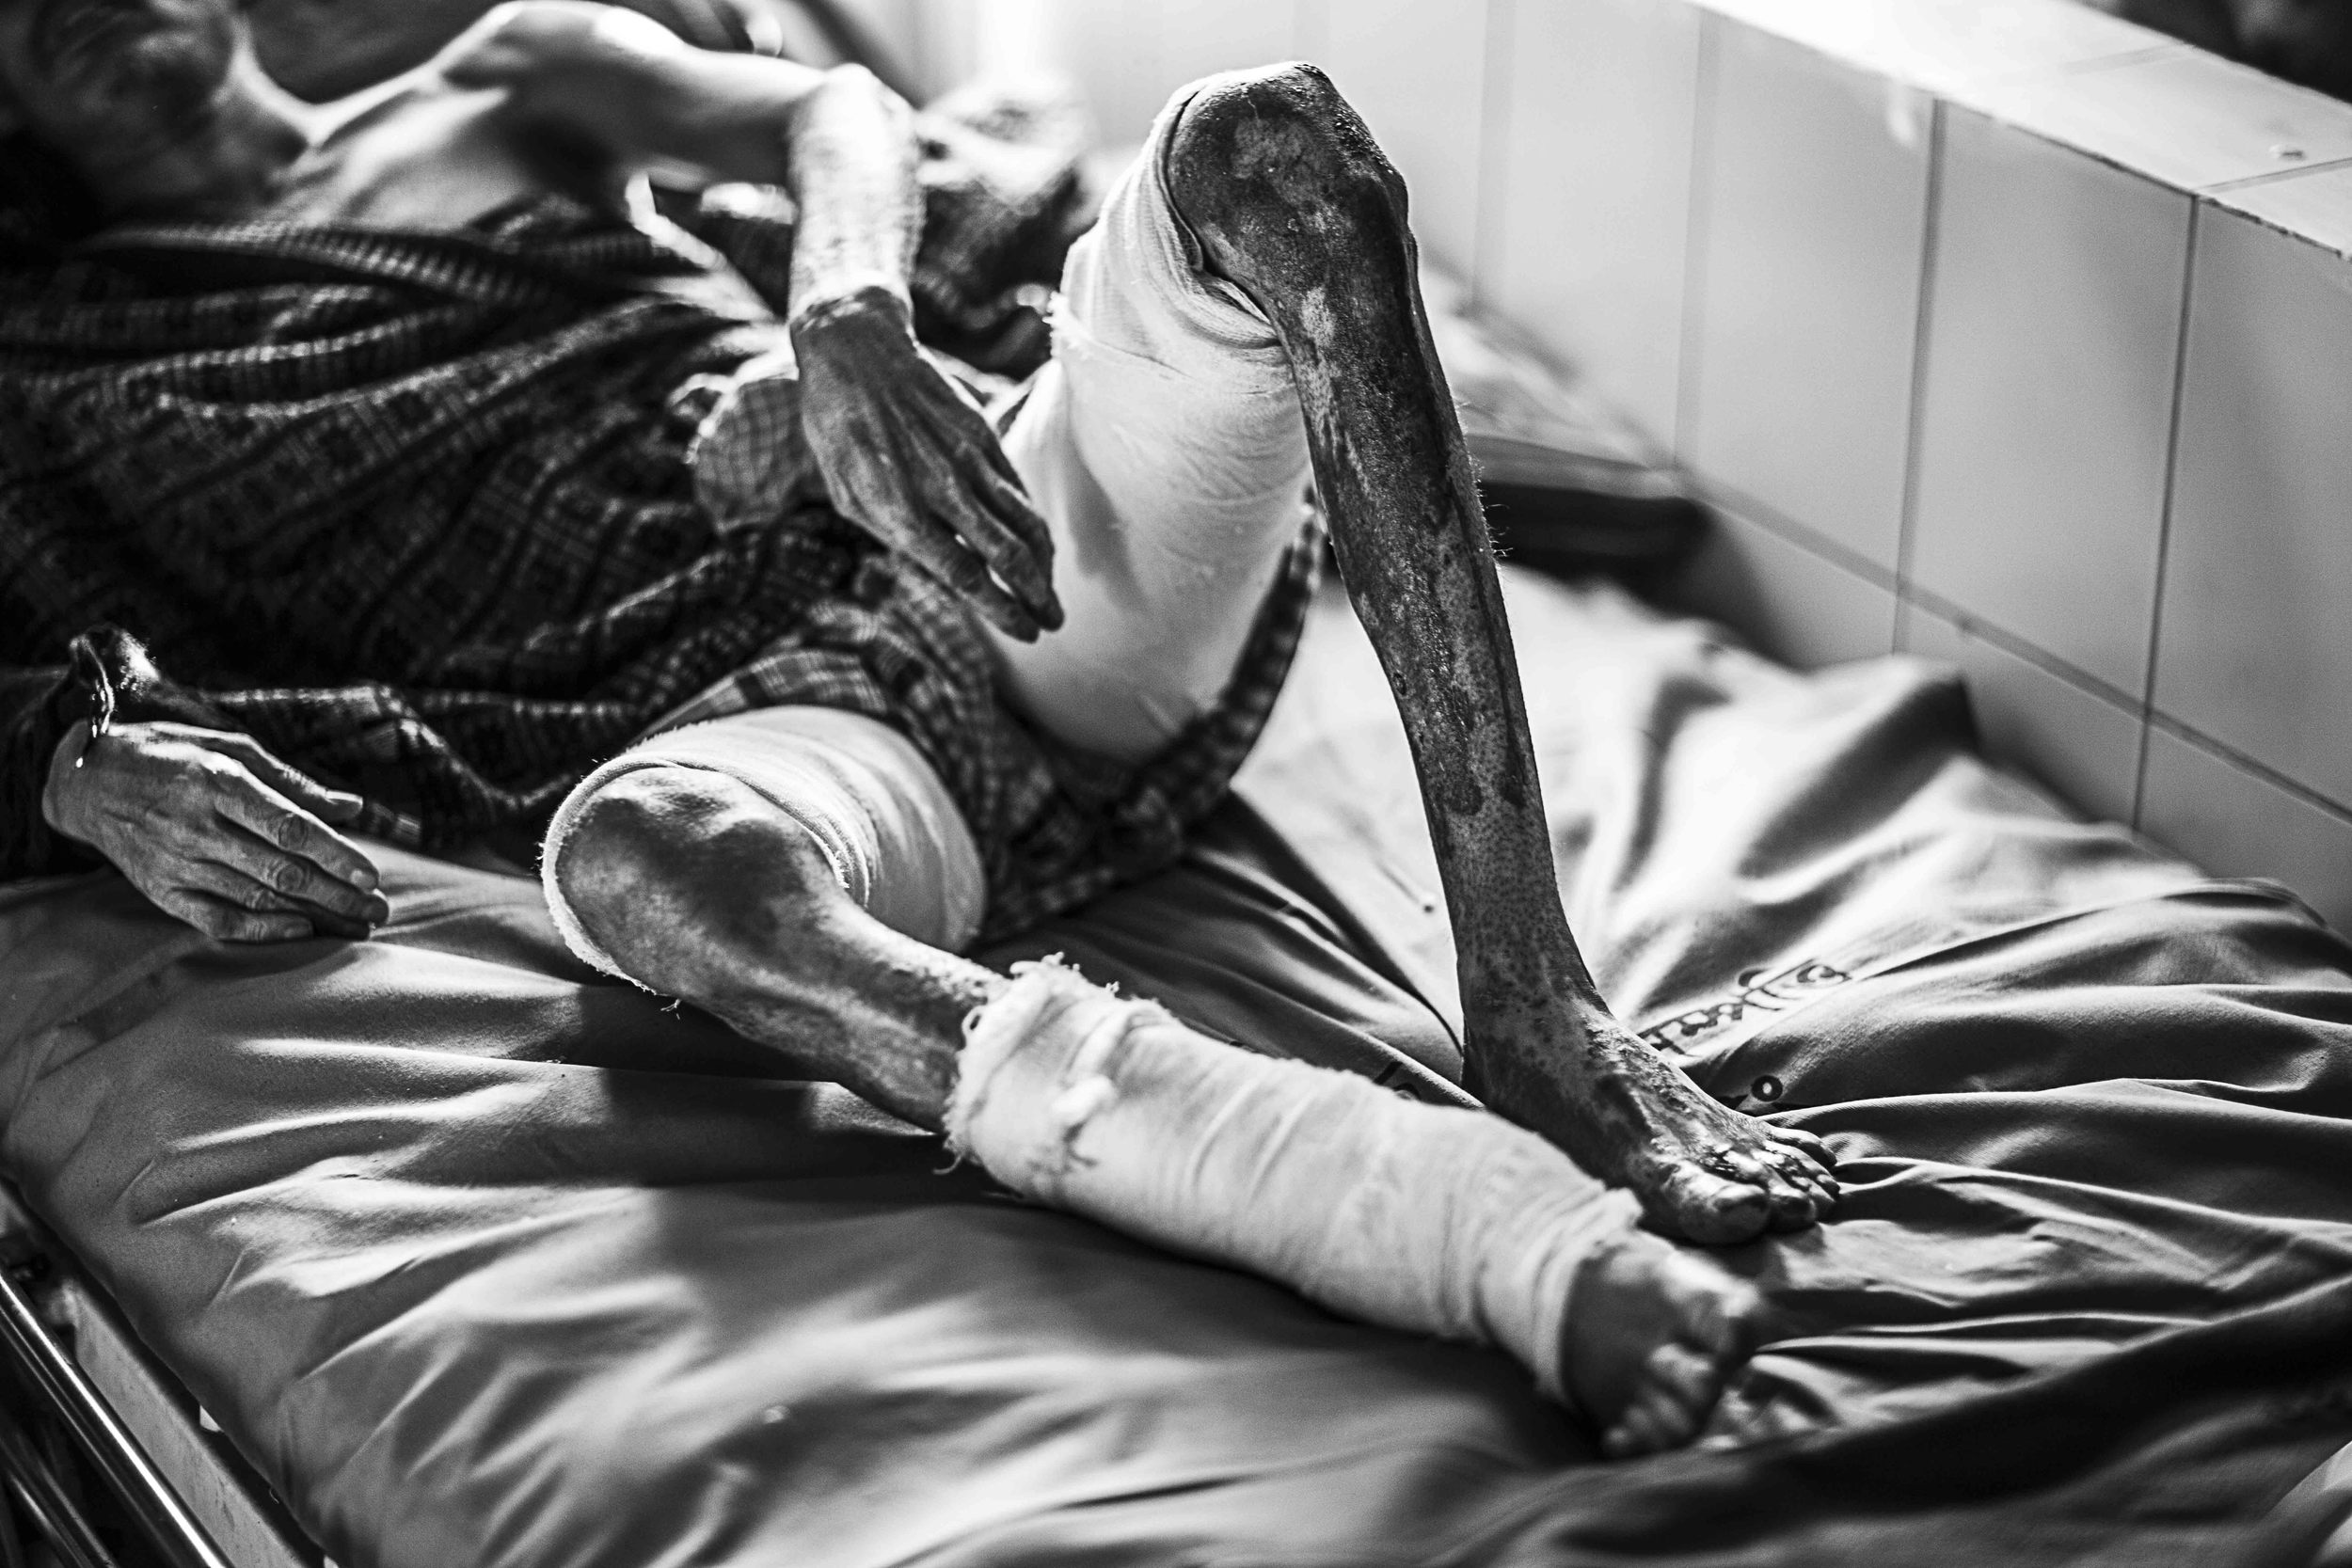  Mohammad Rubel Mia’s burns to his legs struggle to heal, his dressings are supposed to be changed numerous times throughout the day, however he is lucky if they are changed once due to the amount of people in the burns unit and lack of staffing.    